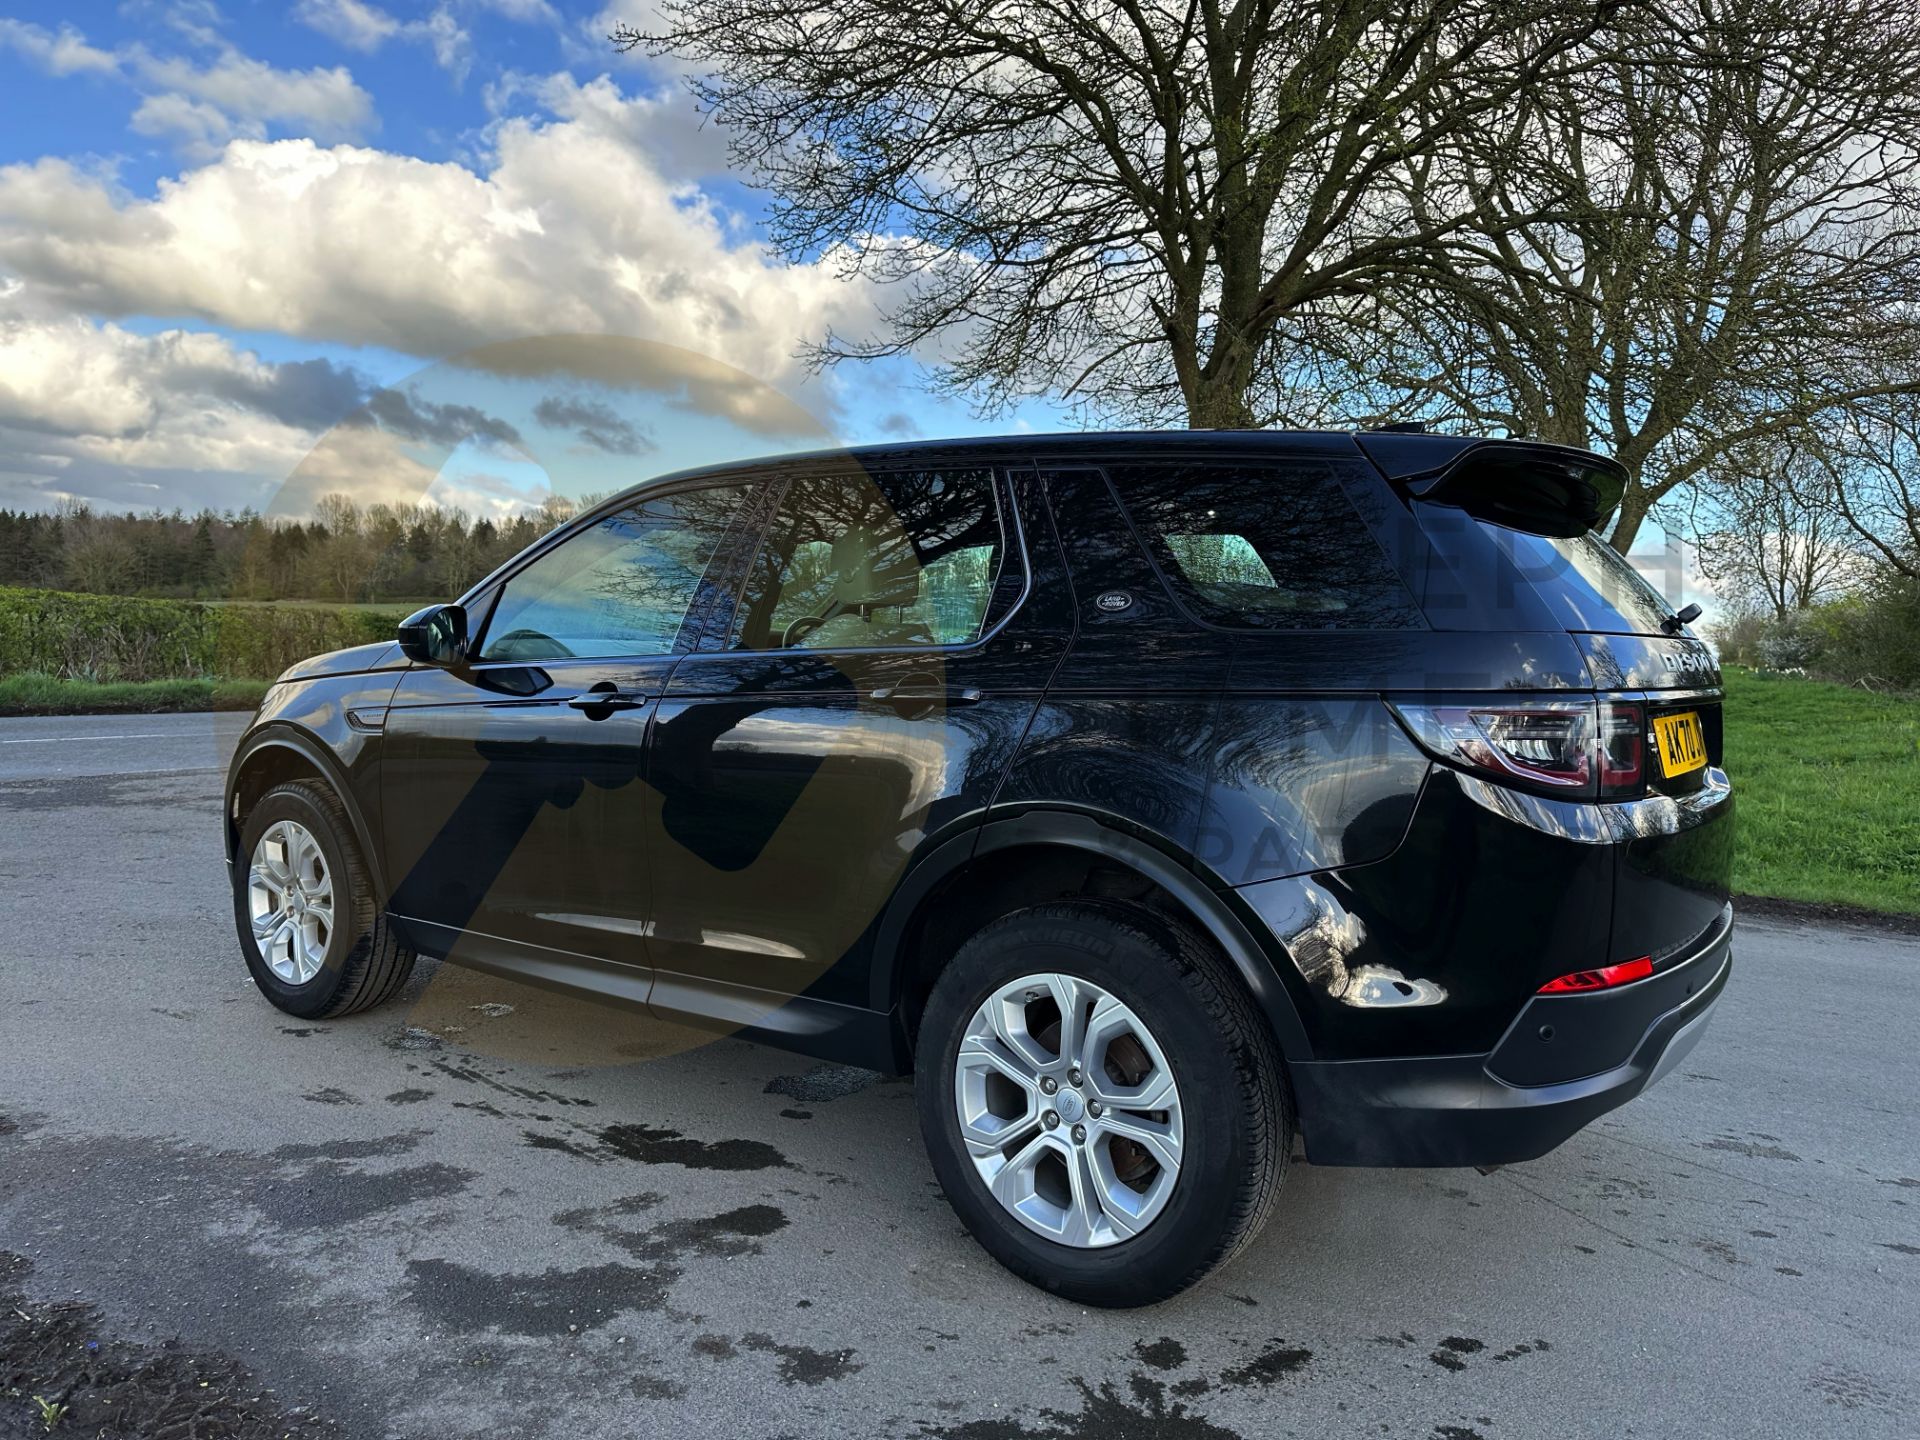 (ON SALE) LAND ROVER DISCOVERY SPORT (2021 - ALL NEW FACELIFT MODEL) 2.0 DIESEL - AUTO STOP/START - Image 9 of 50